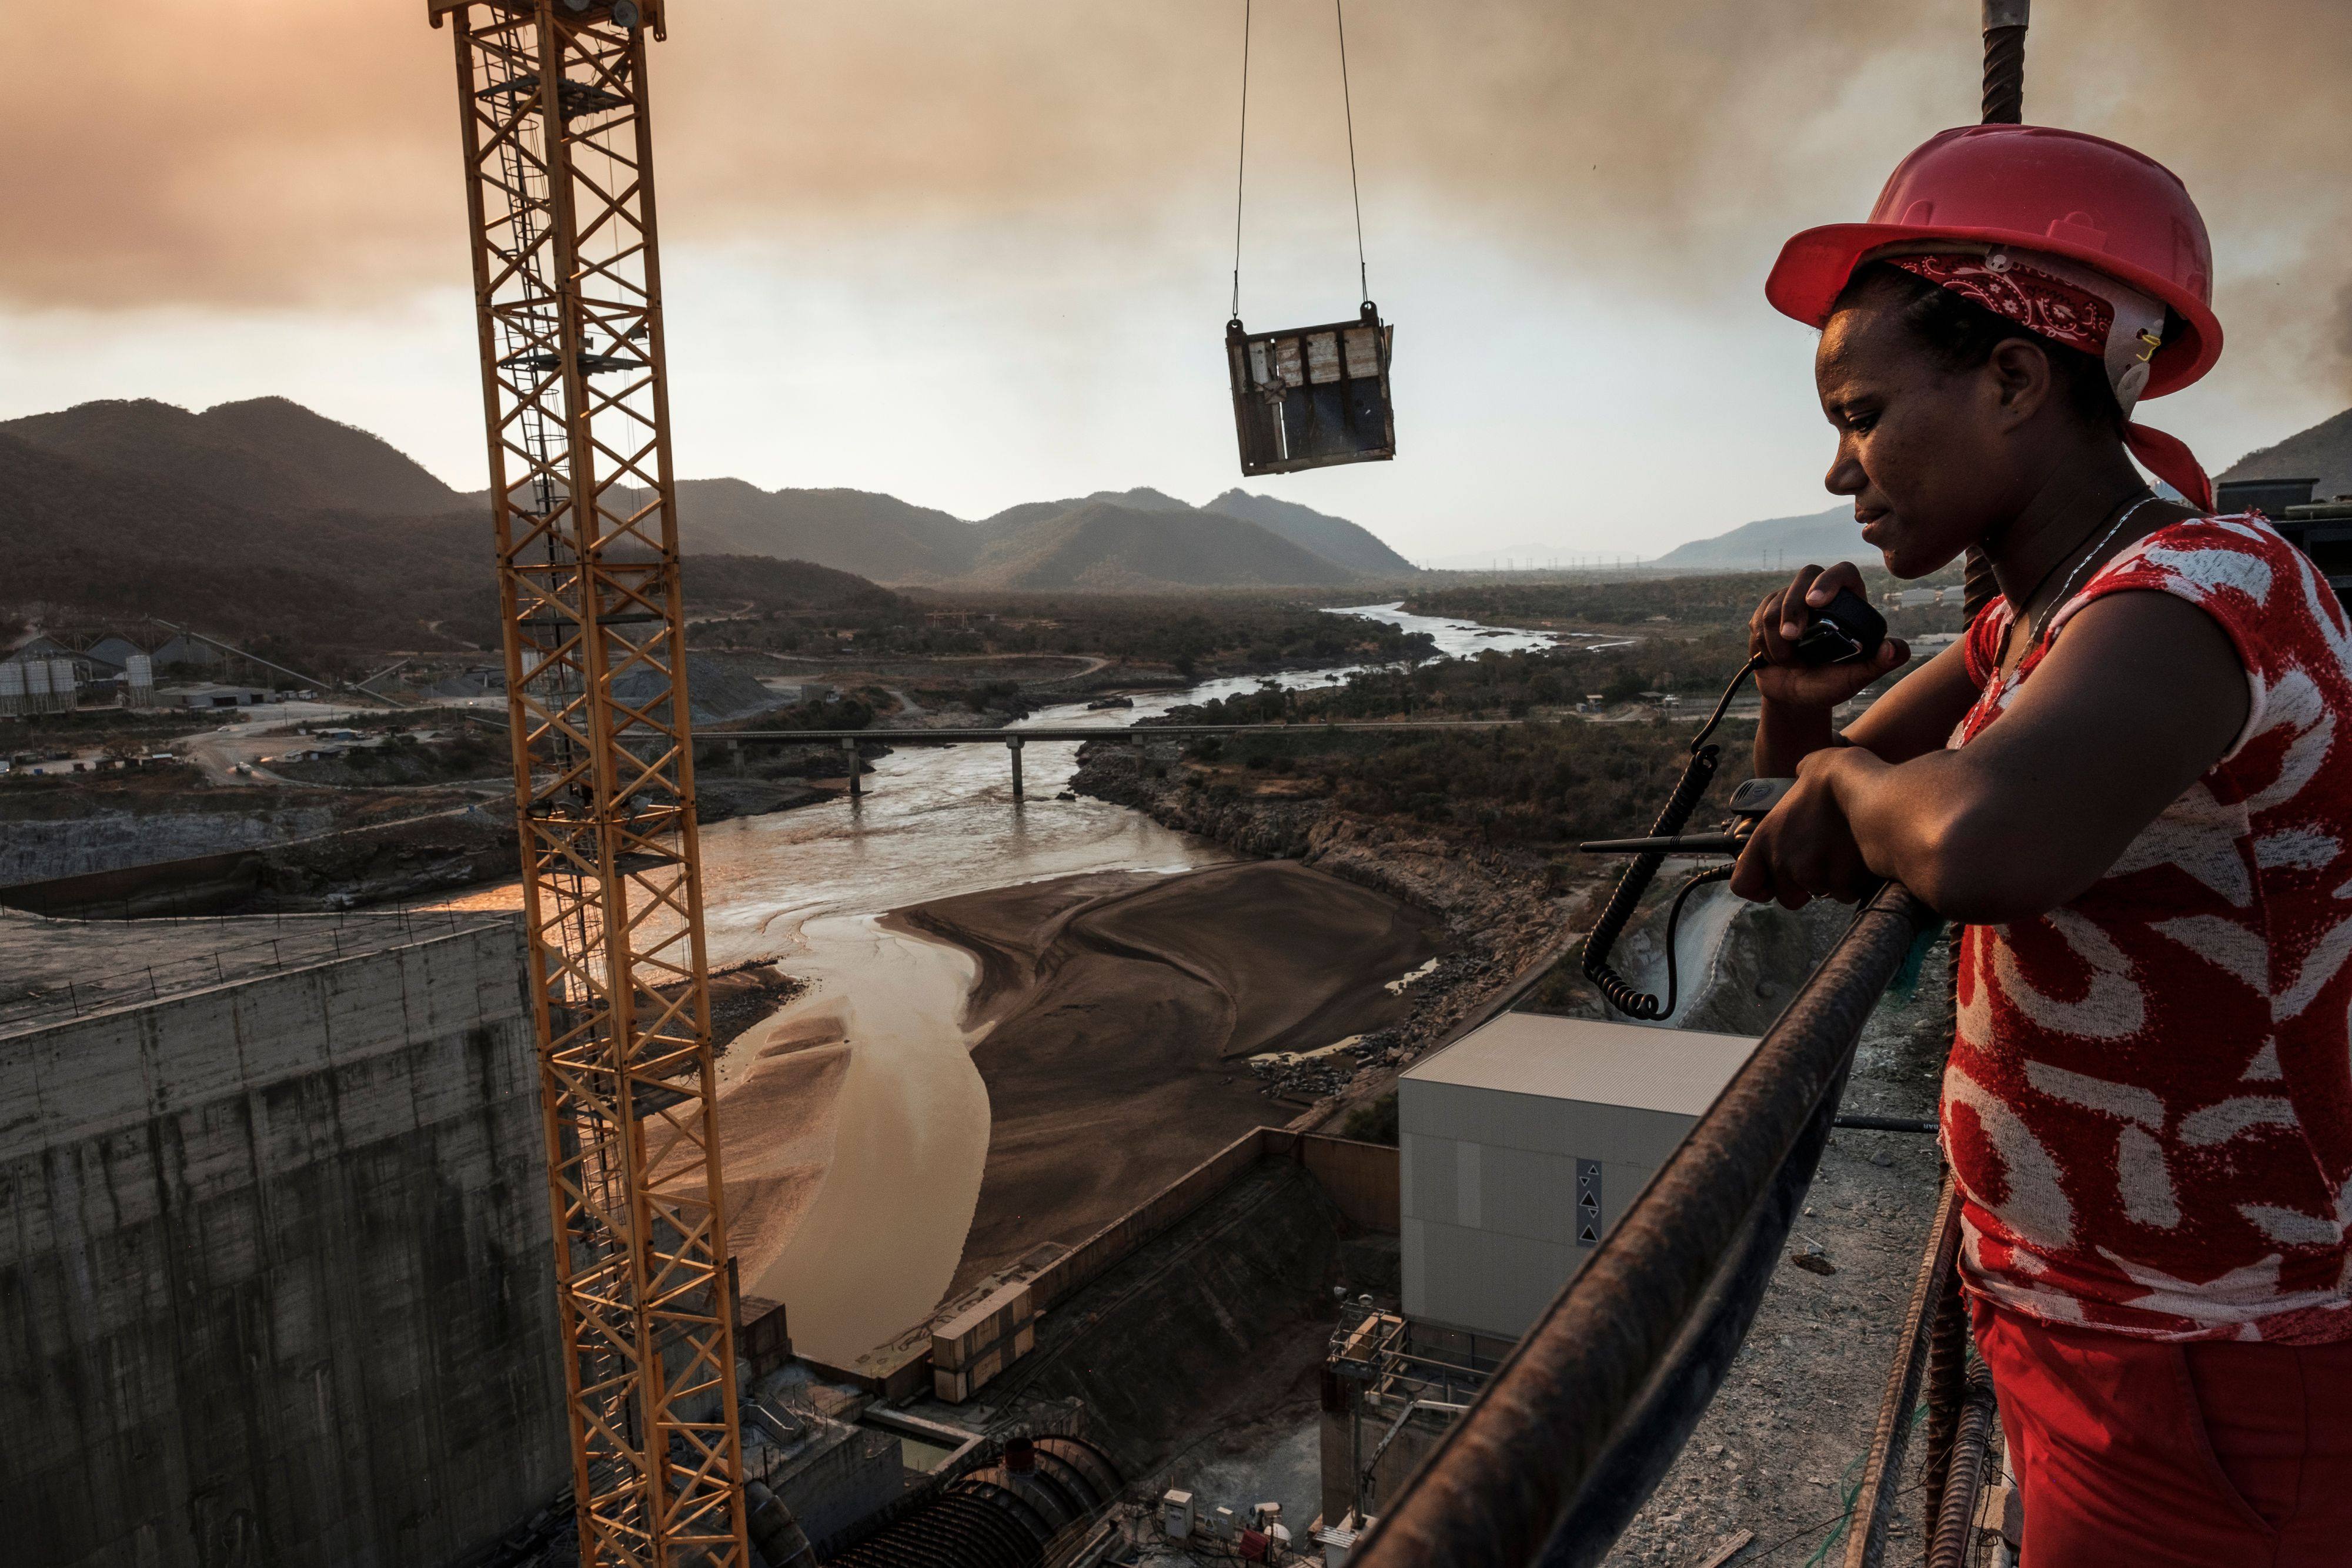 African diplomats are keen for more concessional lending from China for infrastructure projects, but with China’s economy still struggling, it is uncertain if the finance will return to pre-pandemic levels. Photo: AFP